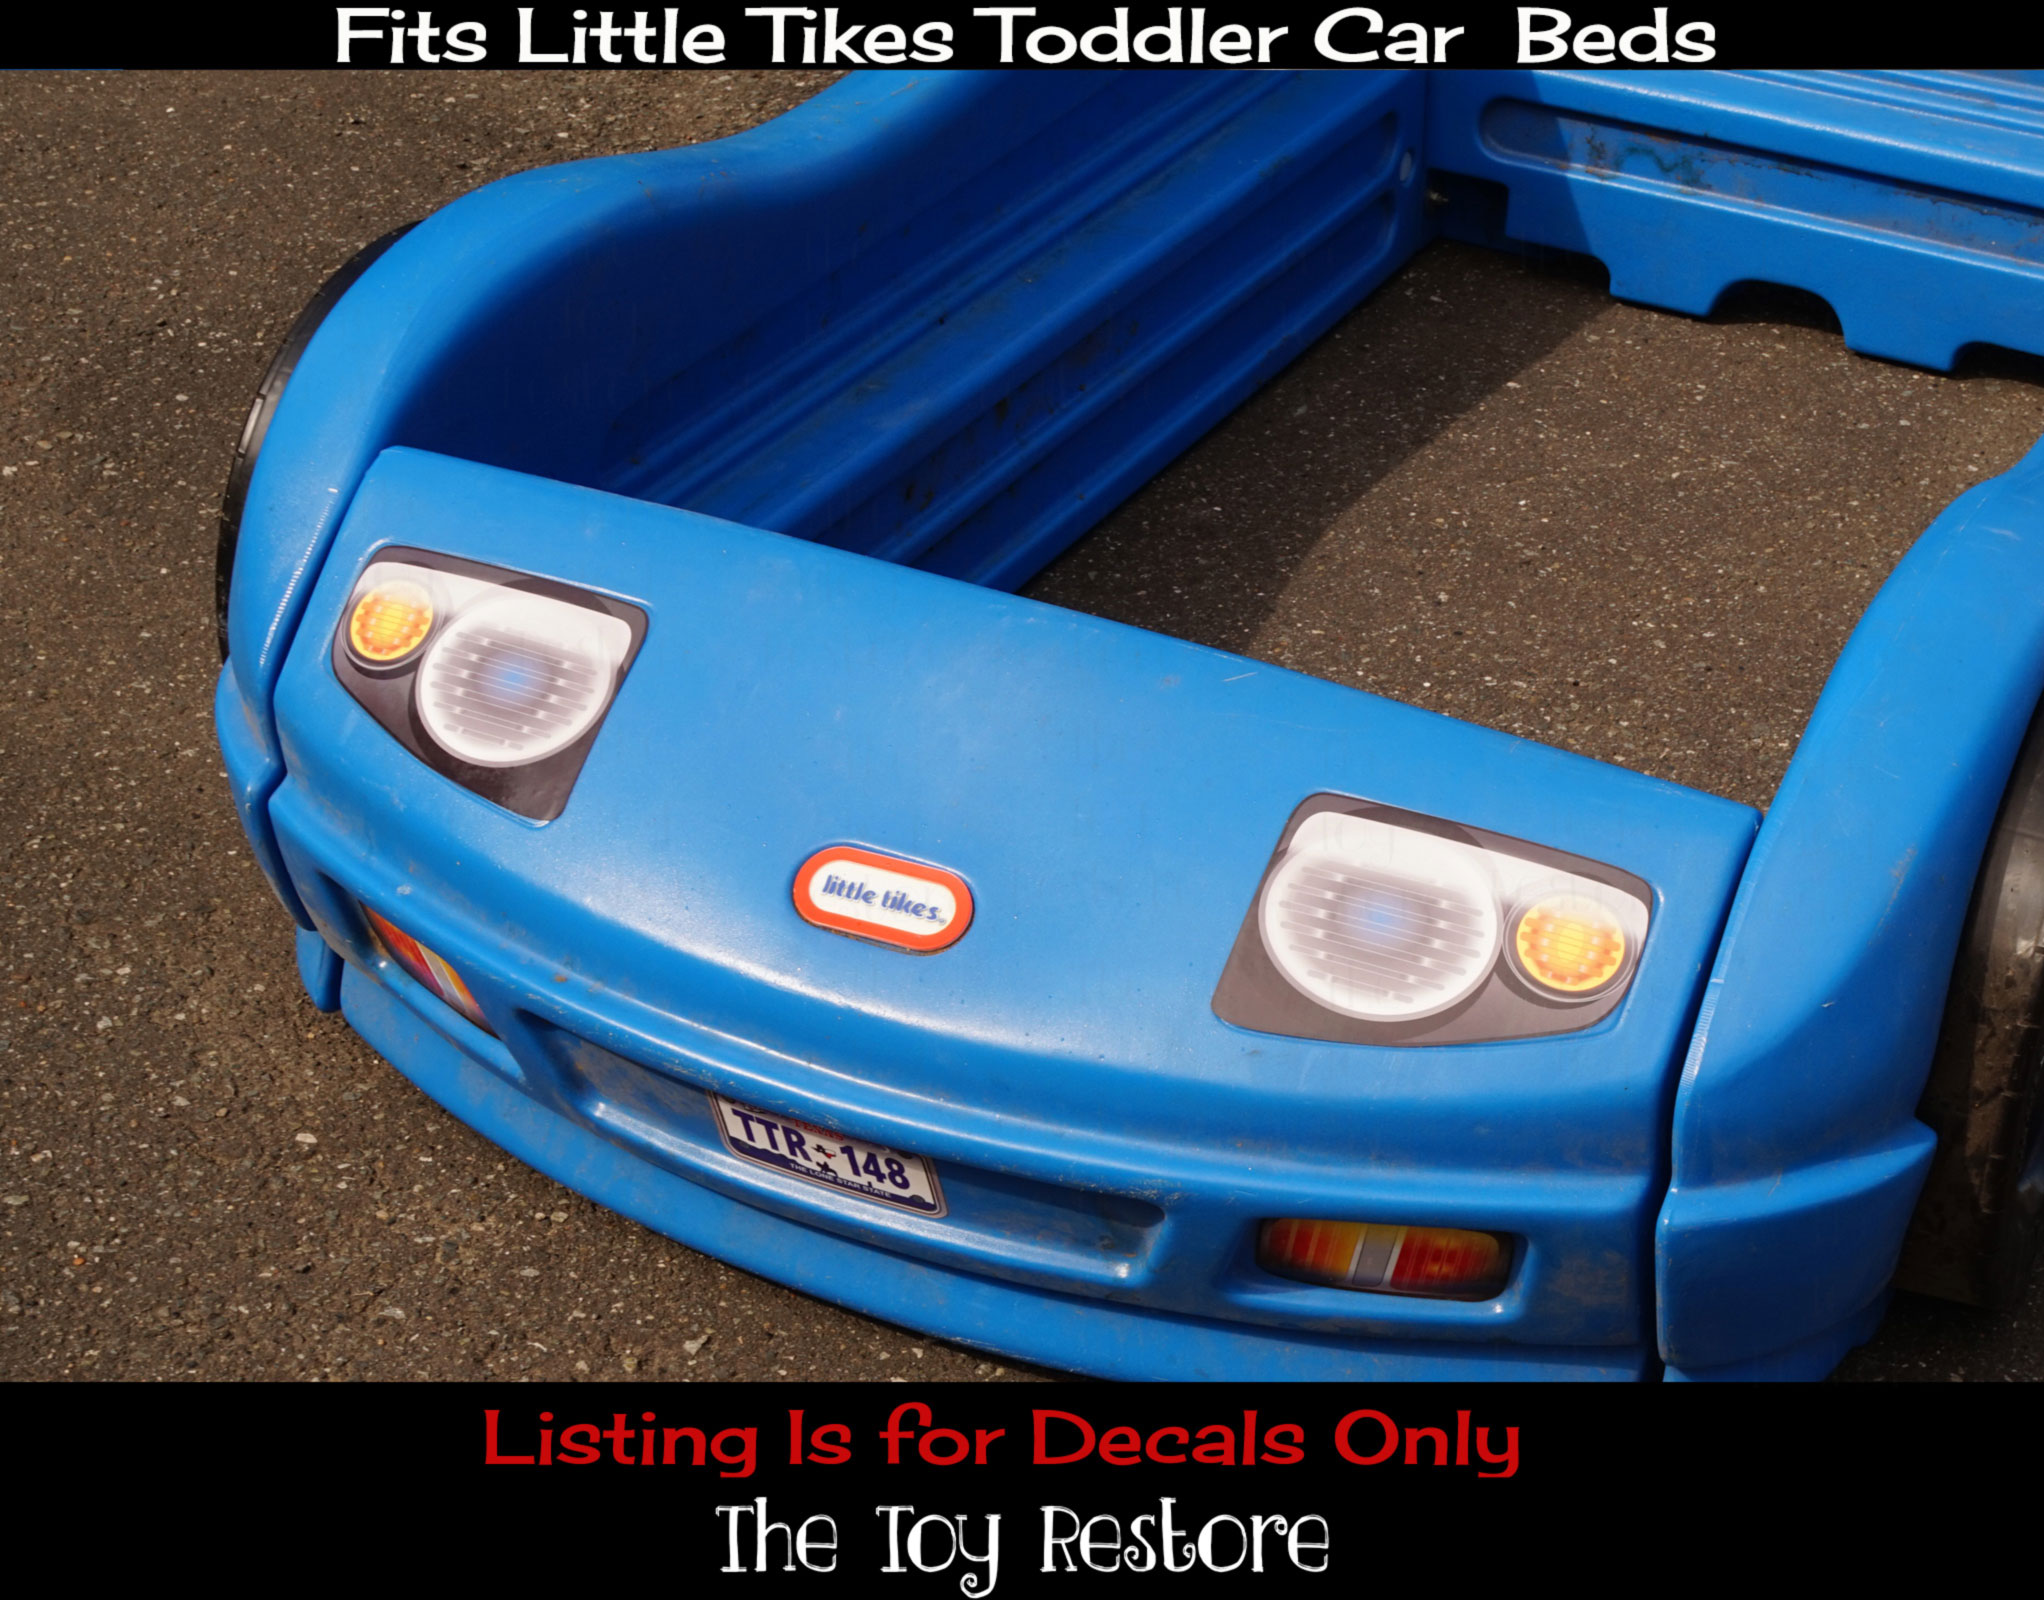 Replacement decals Fits Little Tikes Blue Toddler Car Bed